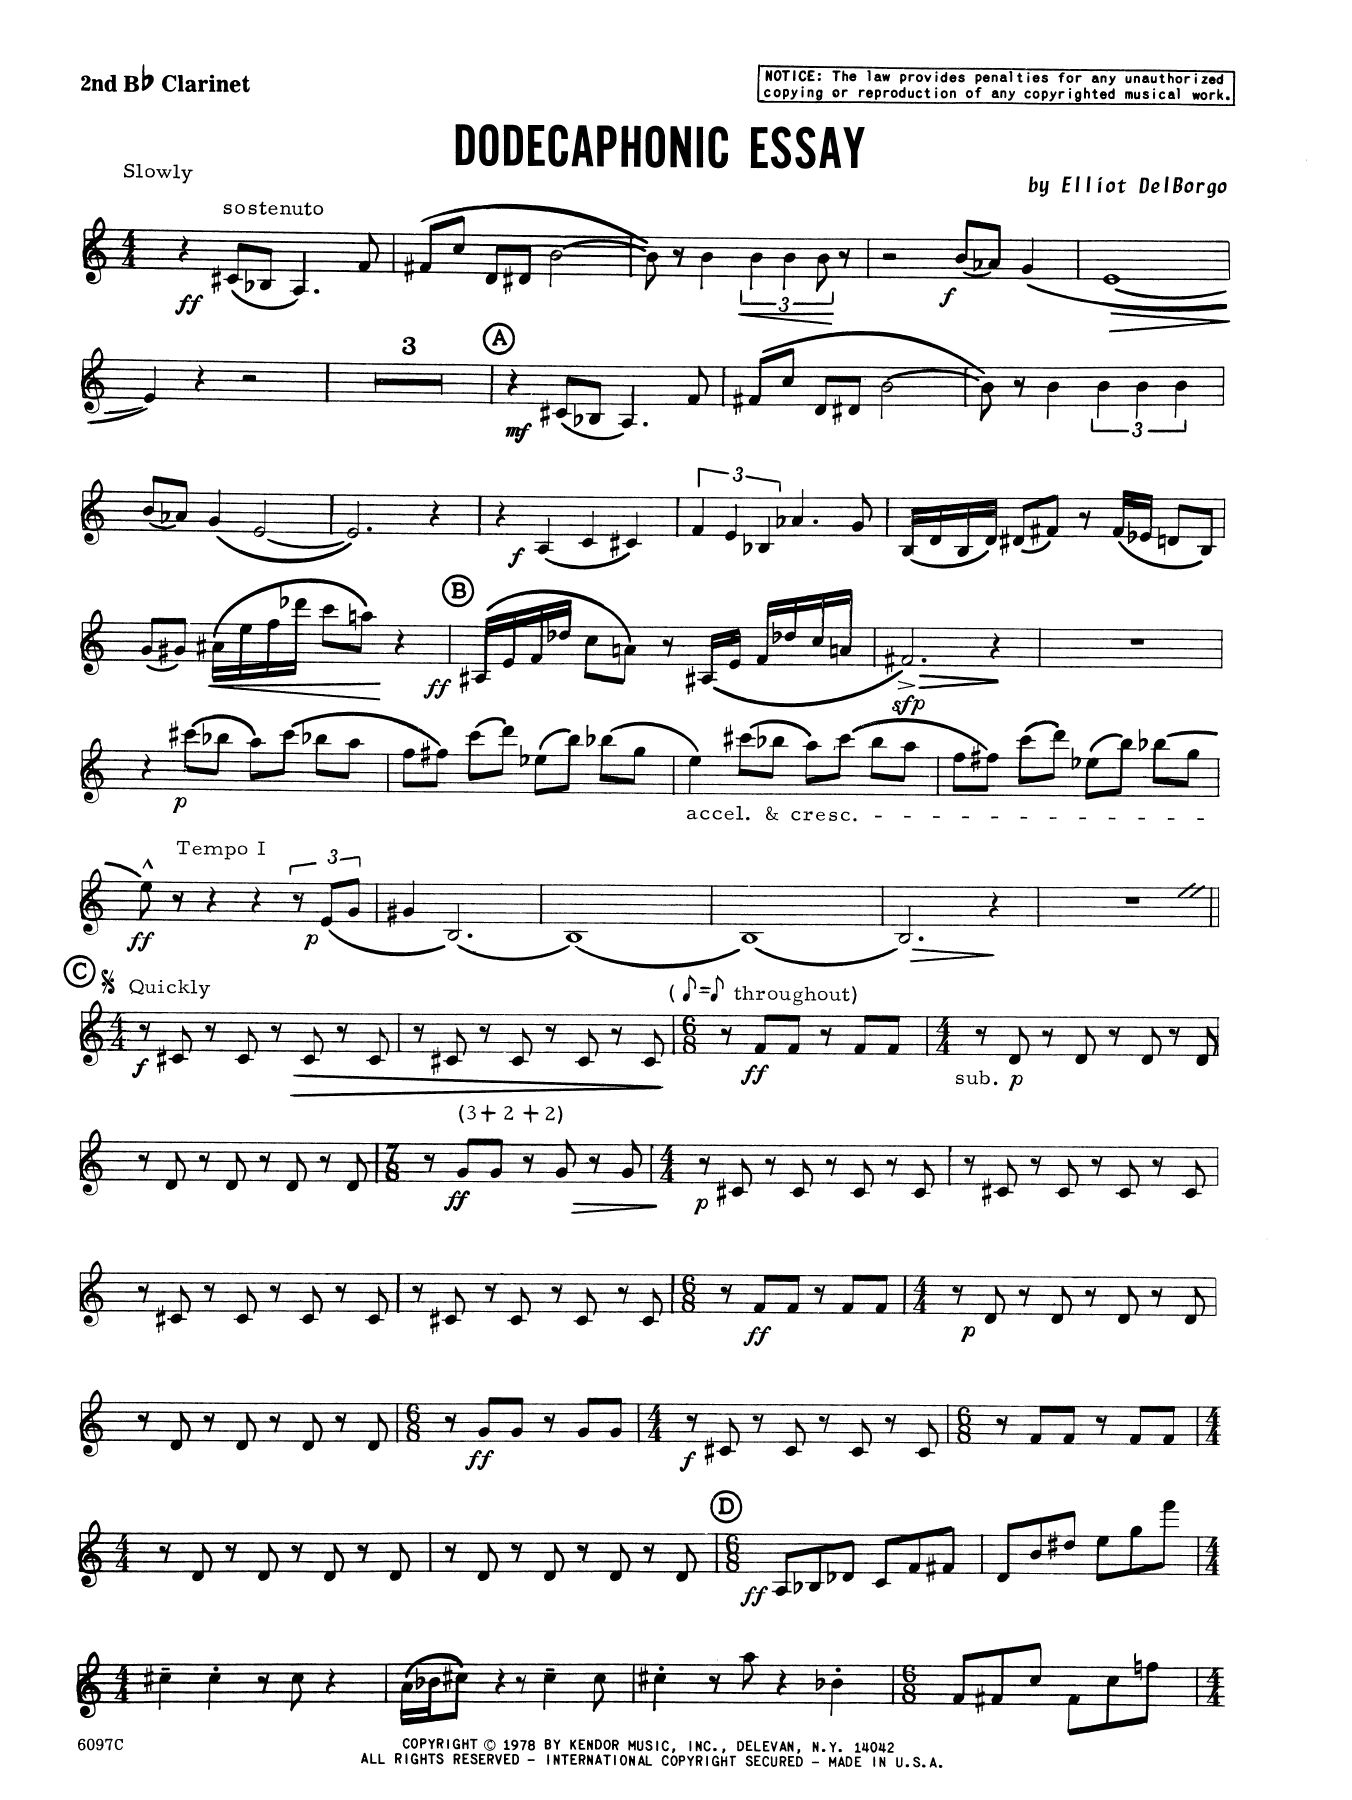 Download Elliot A. Del Borgo Dodecaphonic Essay - 2nd Bb Clarinet Sheet Music